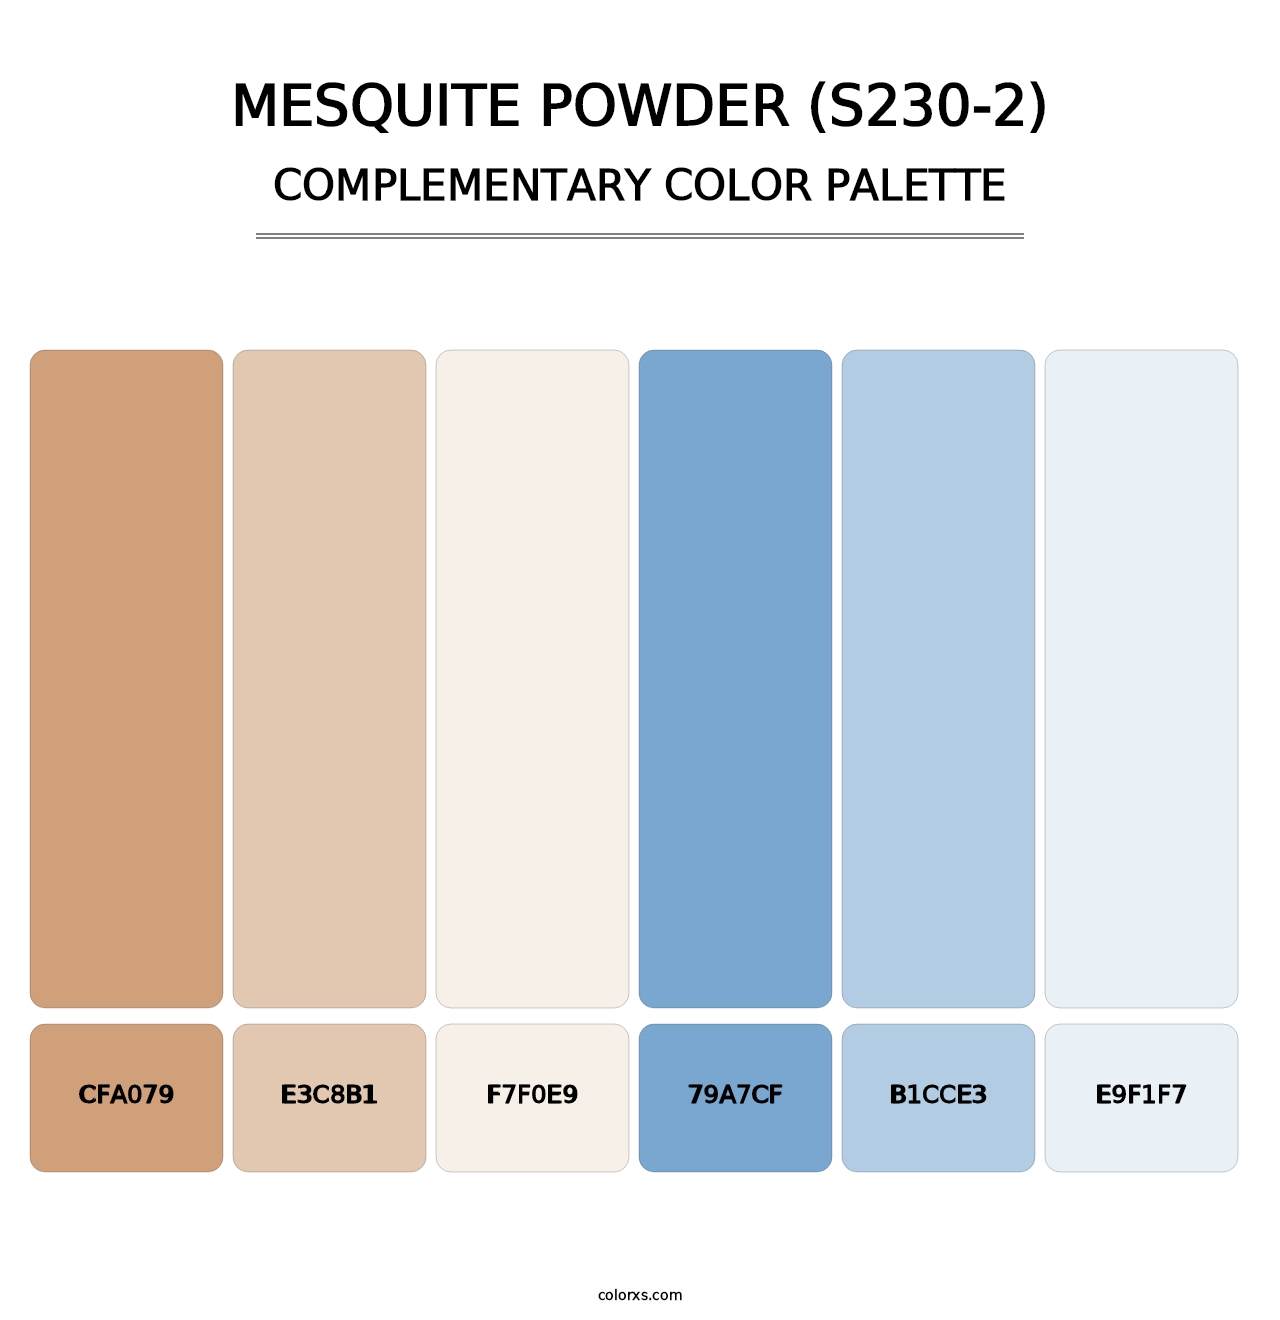 Mesquite Powder (S230-2) - Complementary Color Palette